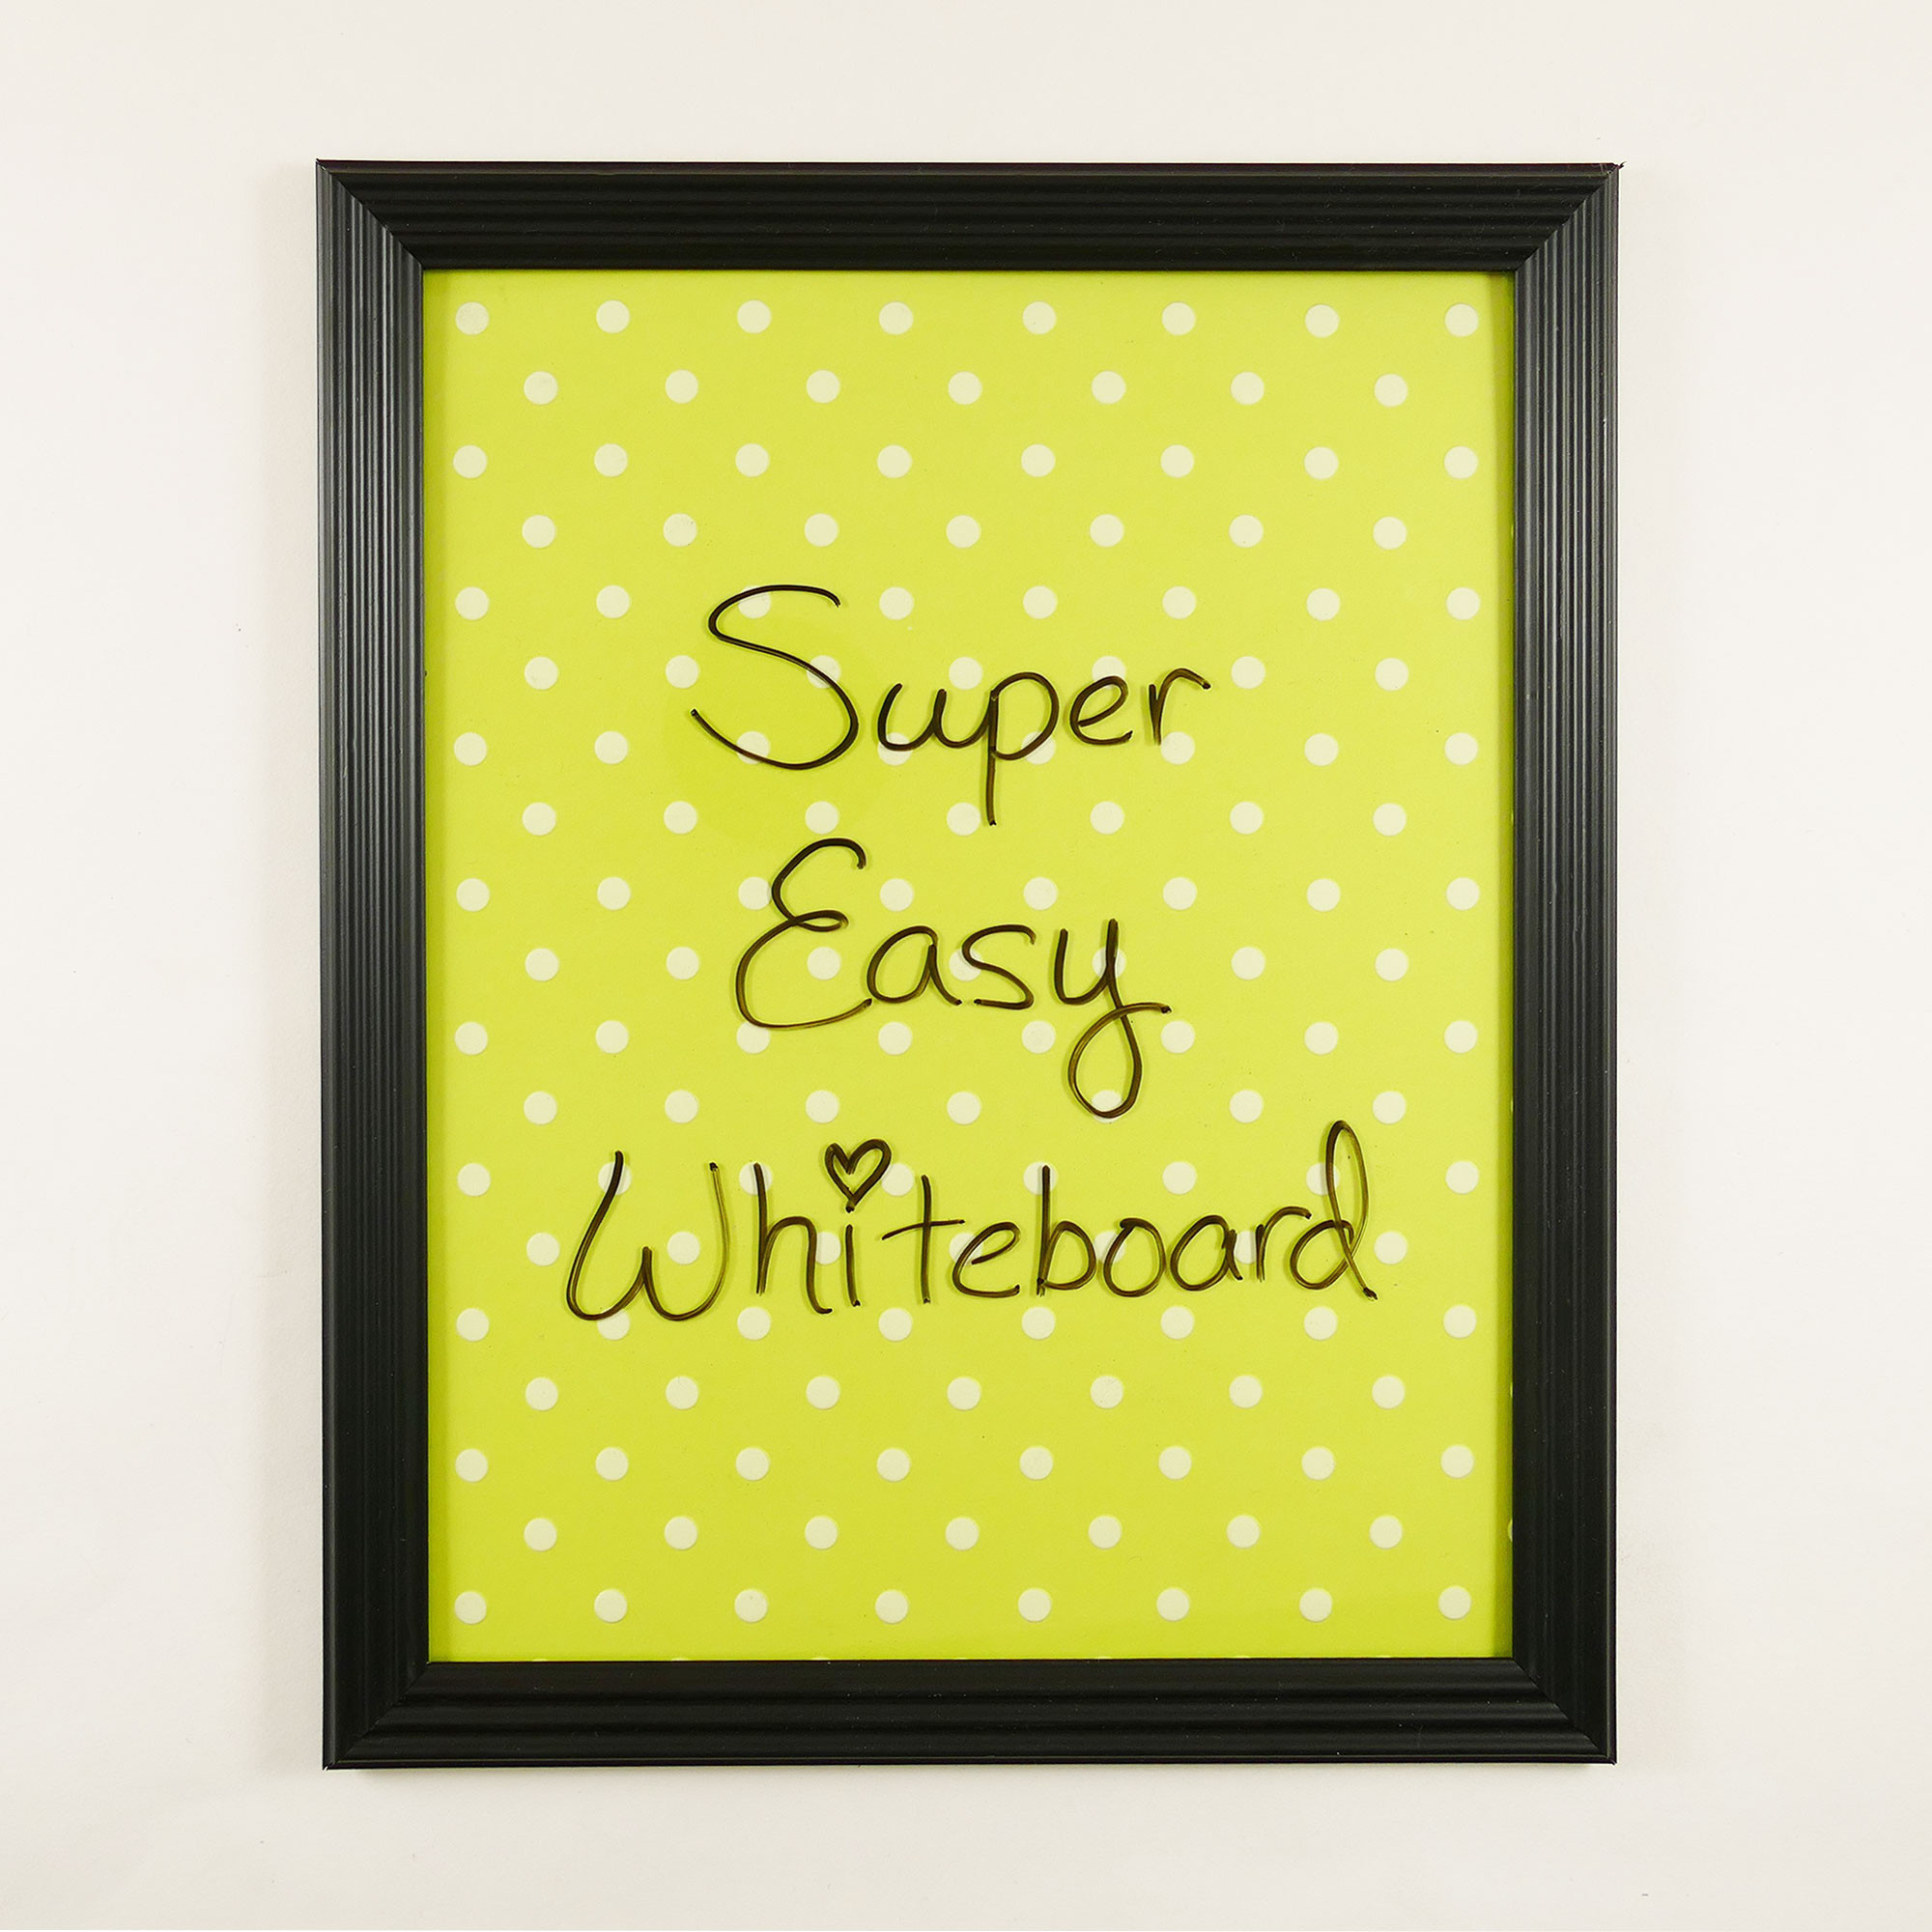 Best ideas about DIY Dry Erase Board
. Save or Pin DIY Dry Erase Board — So Simple & Cute Jennifer Maker Now.